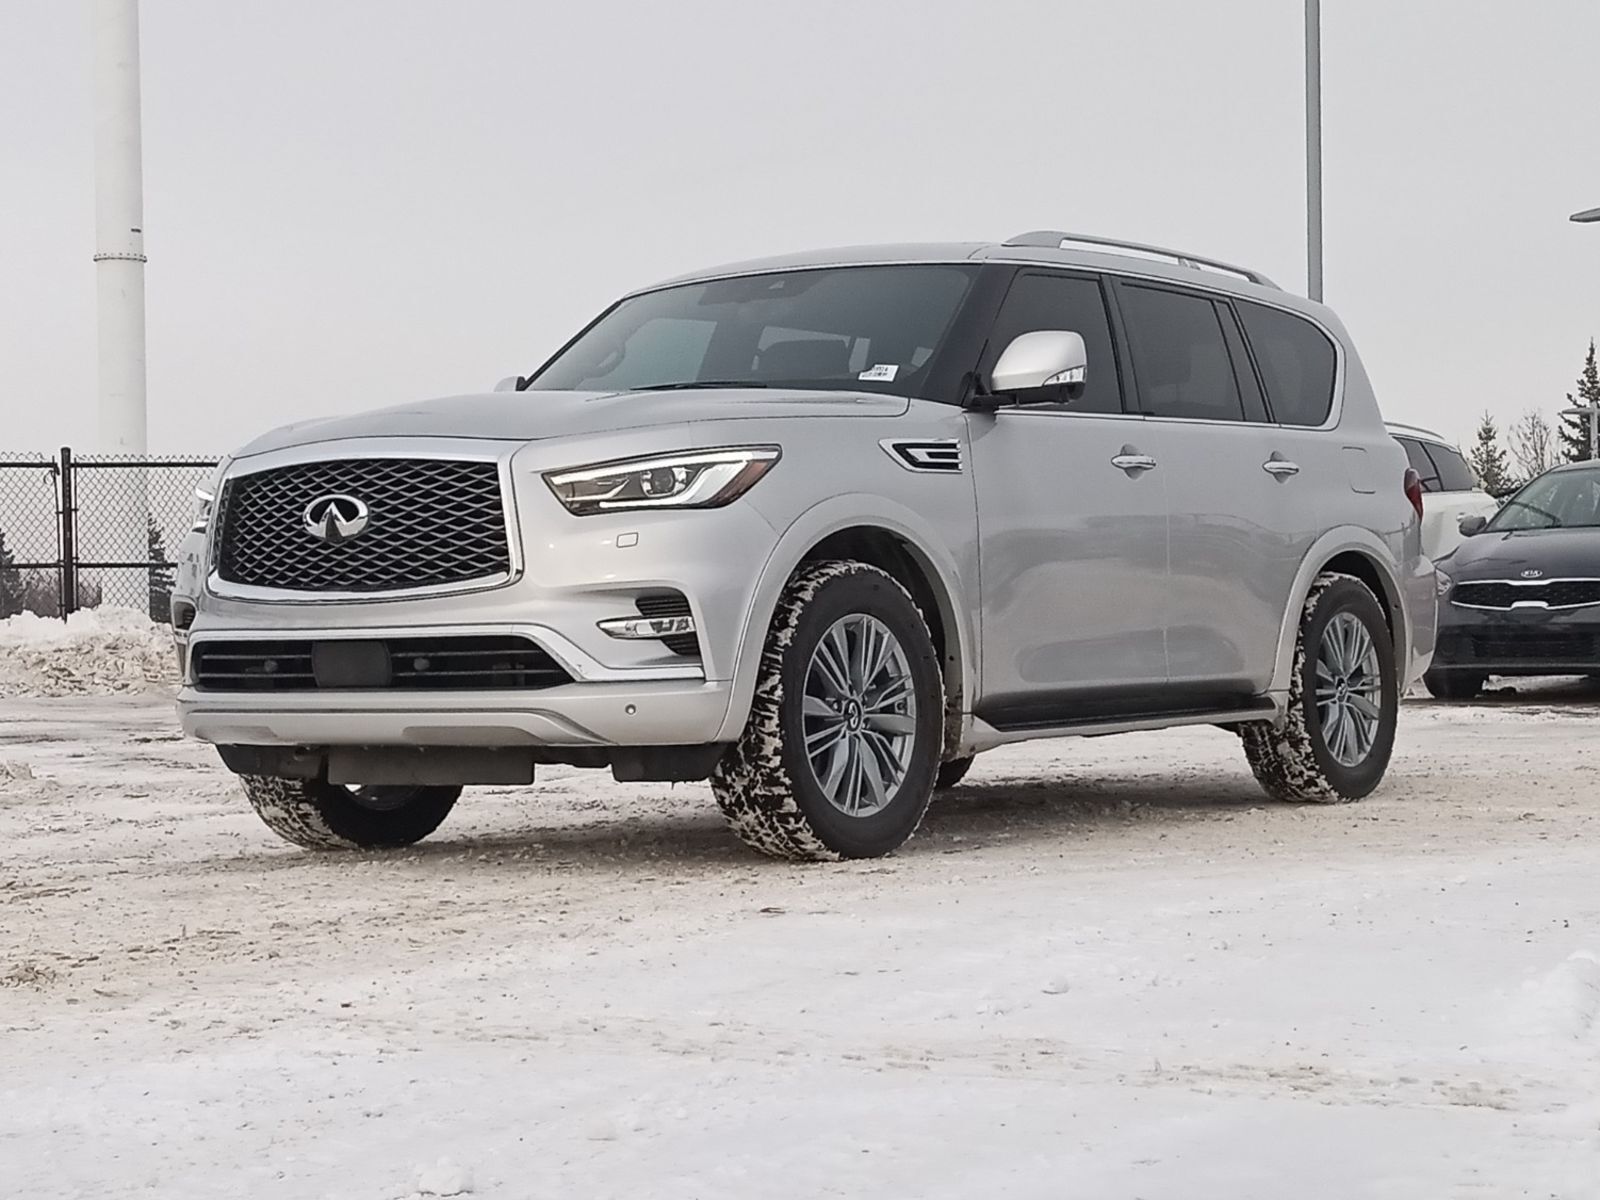 2022 Infiniti QX80 LUXE, 8-PASS, LEATHER, NAVIGATION, CPO AVAIL